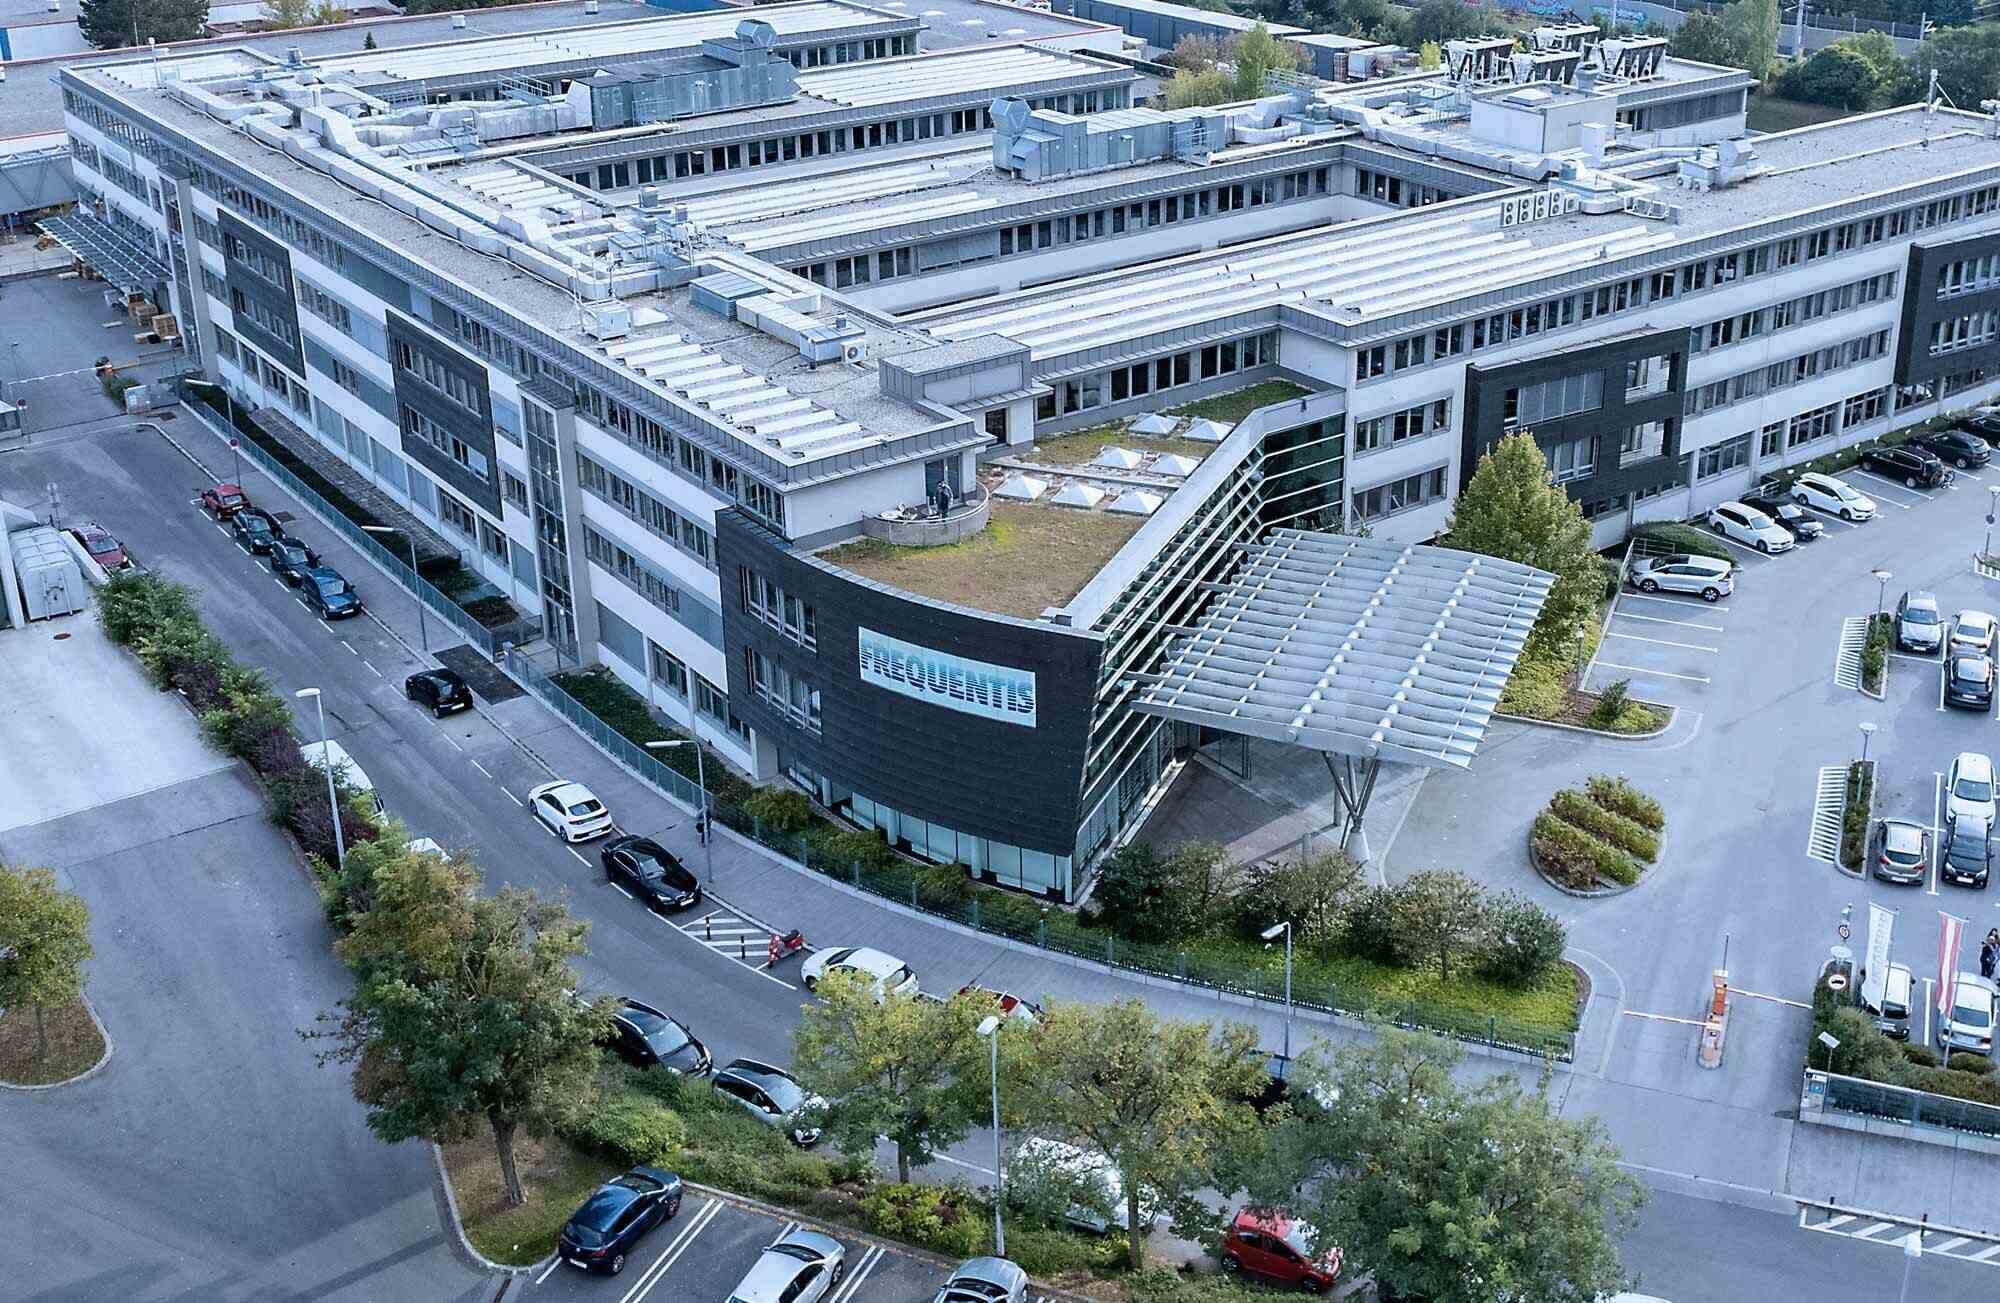 picture showing the Frequentis Headquarters in Vienna